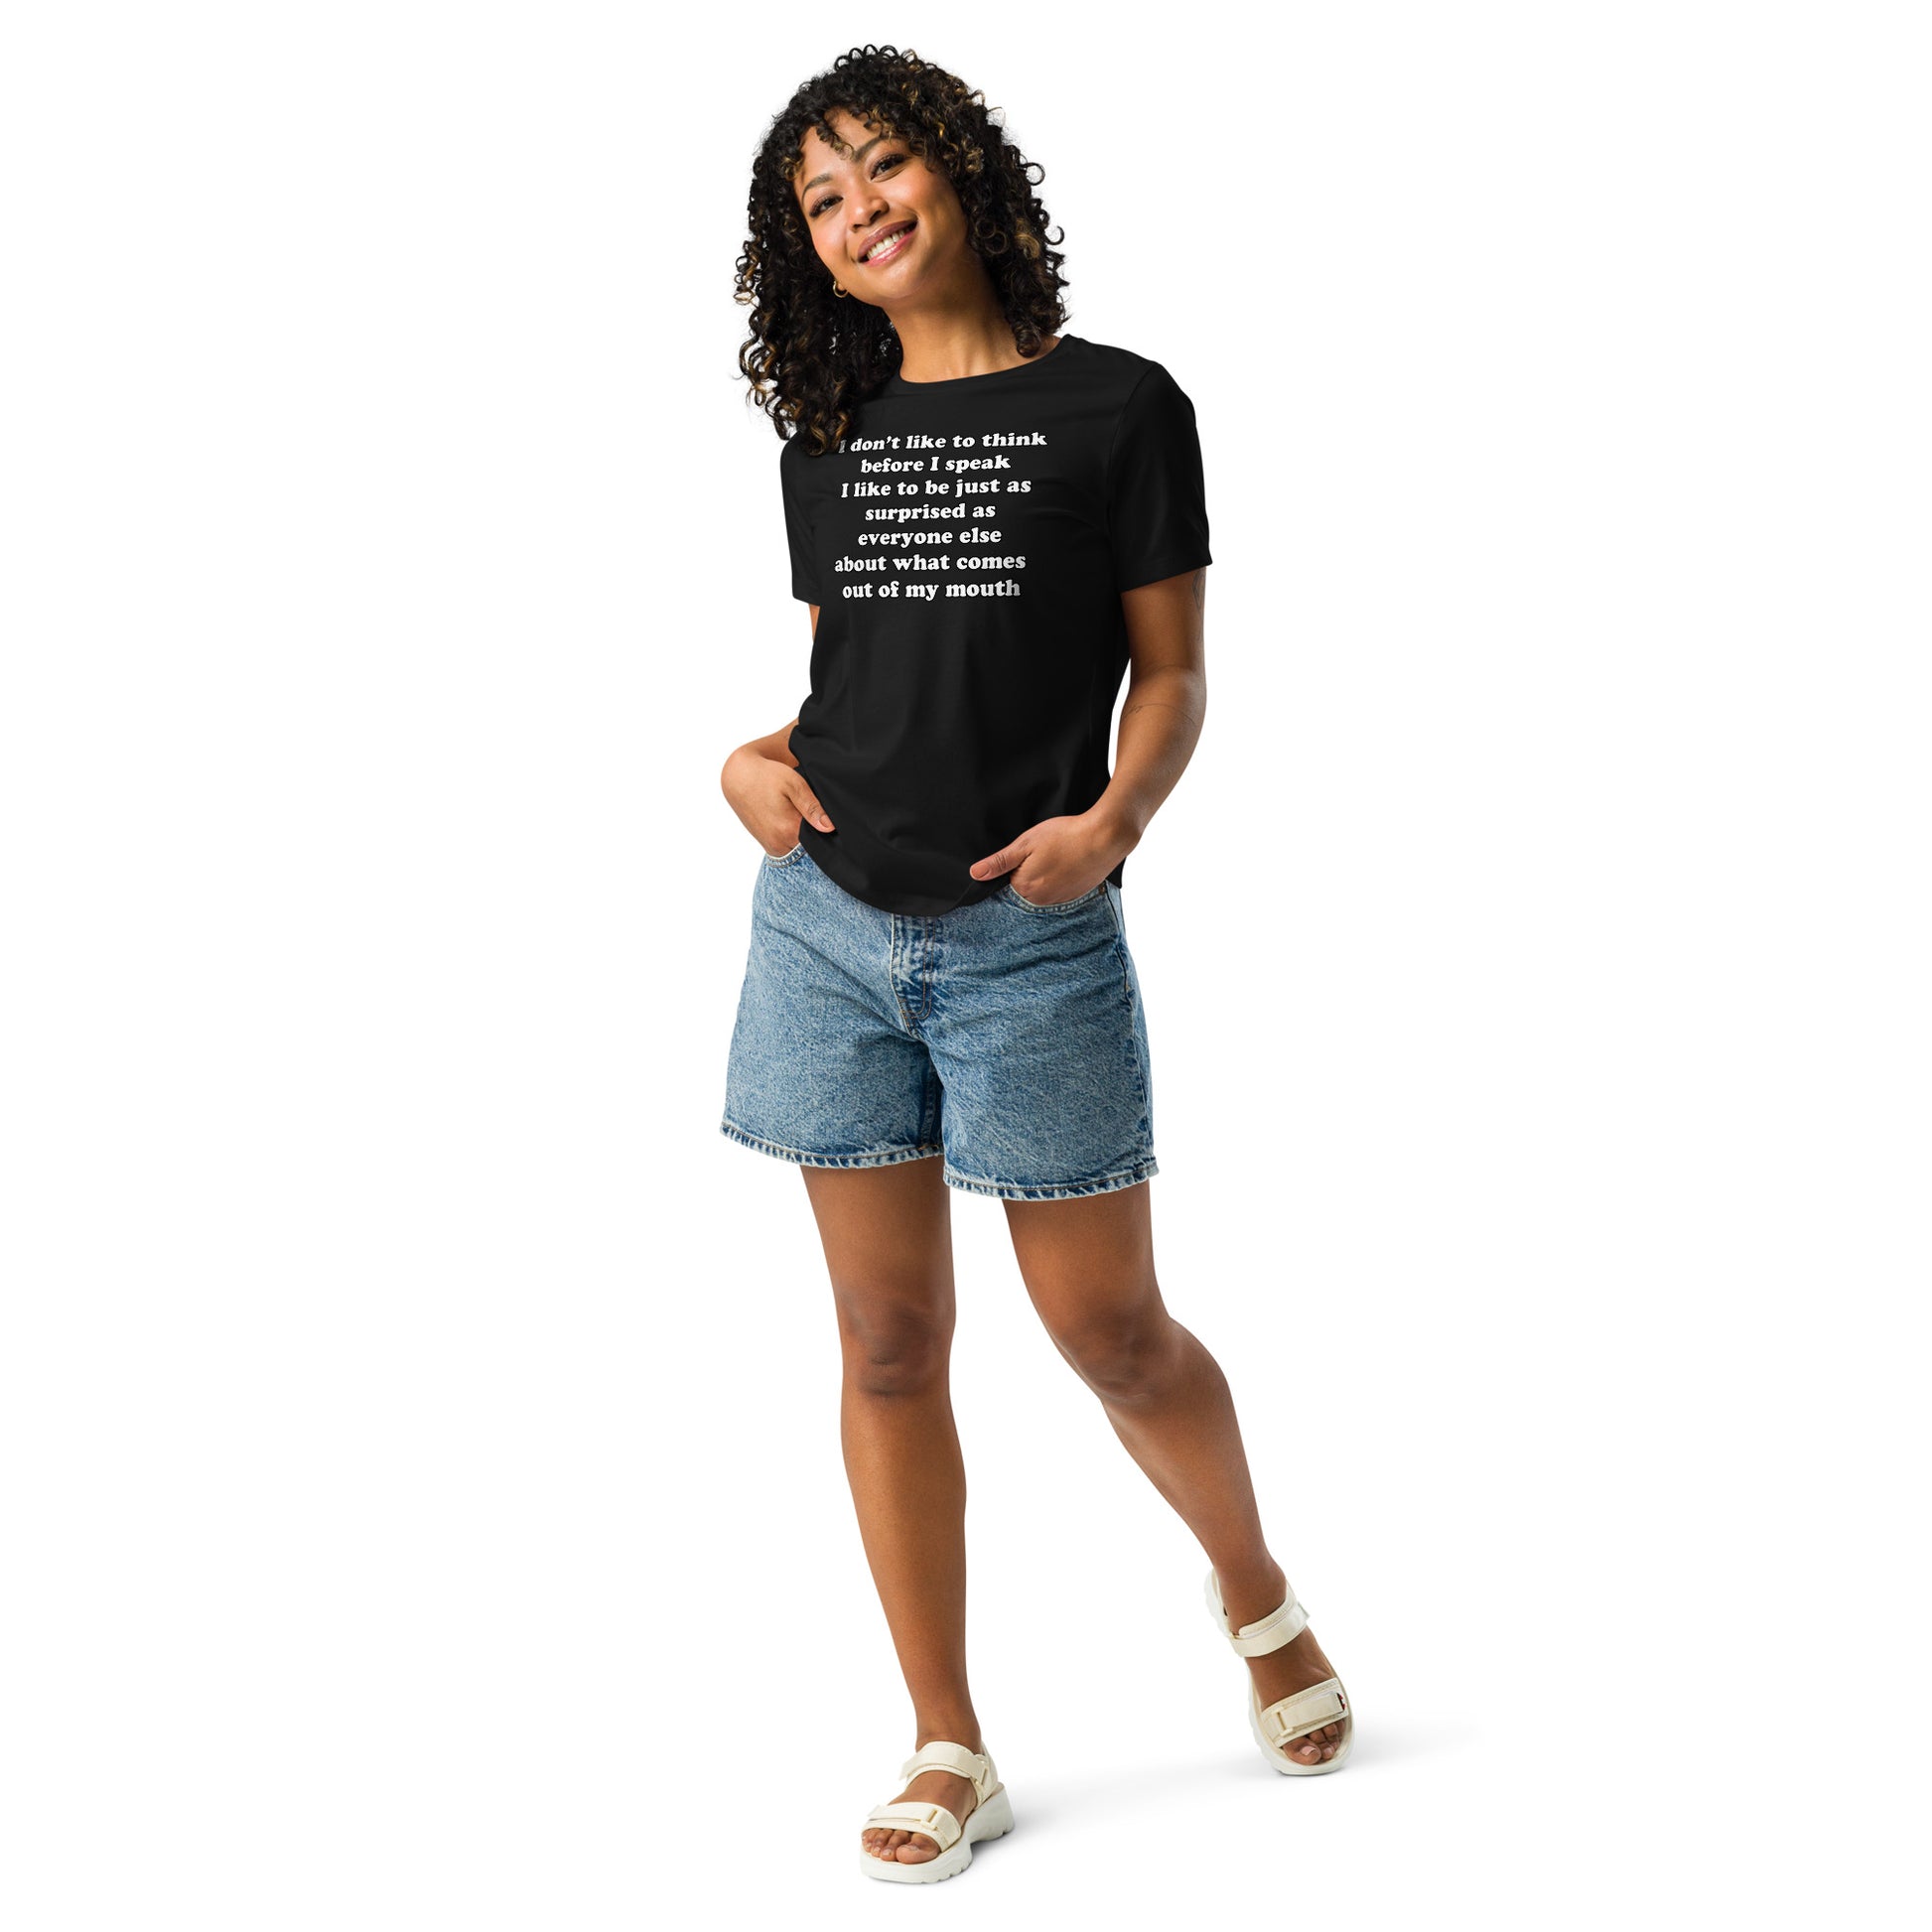 Woman with black t-shirt with text “I don't think before I speak Just as serprised as everyone about what comes out of my mouth"